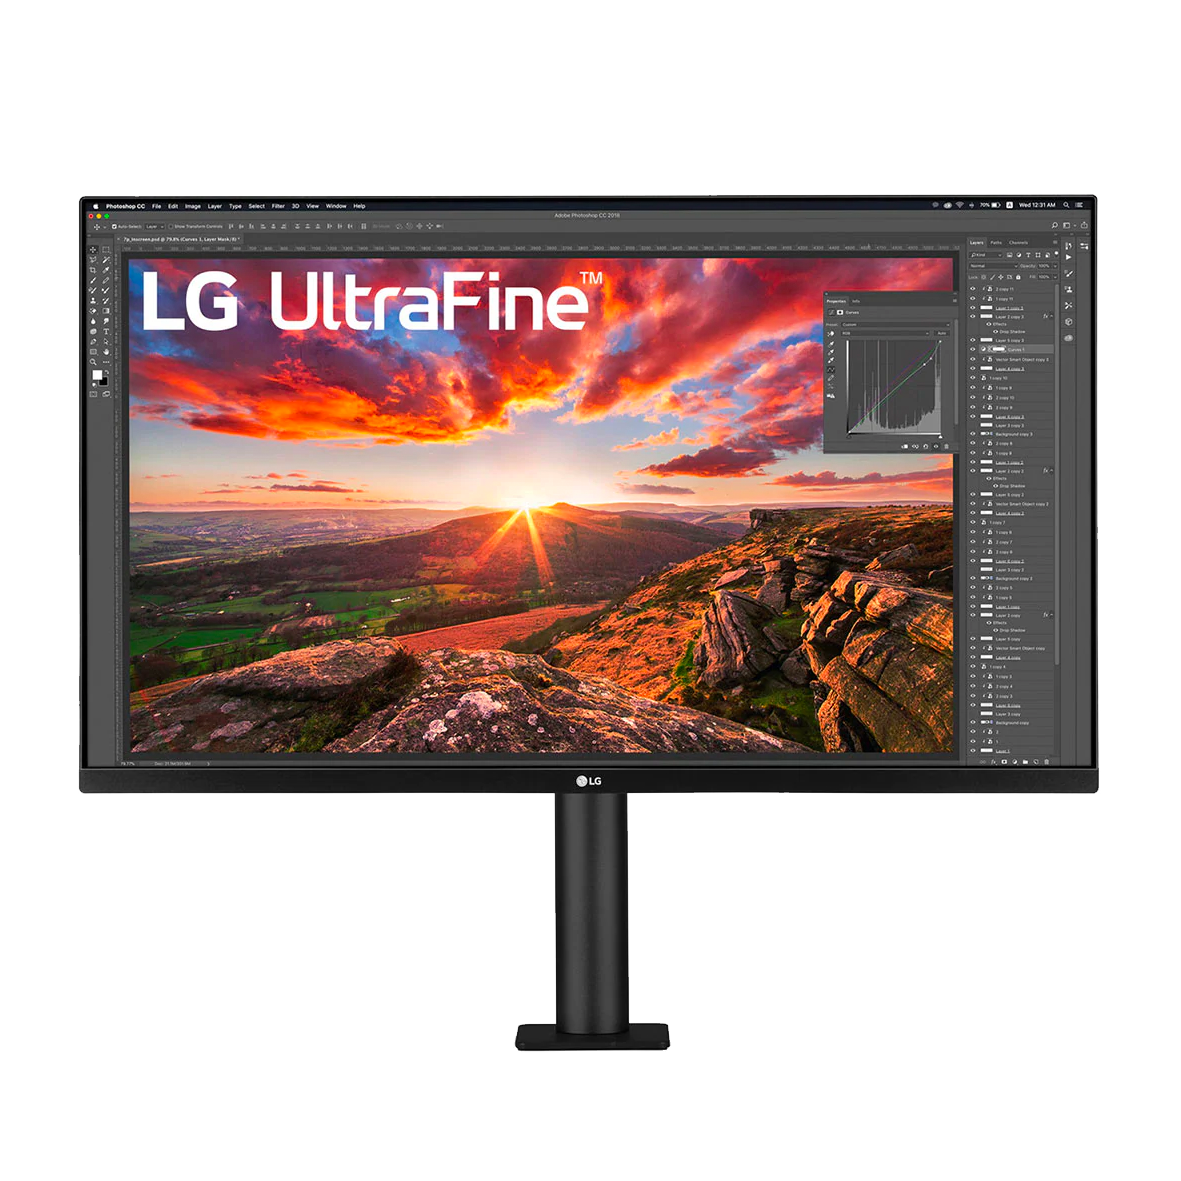 LG-UltraFine-monitor.png